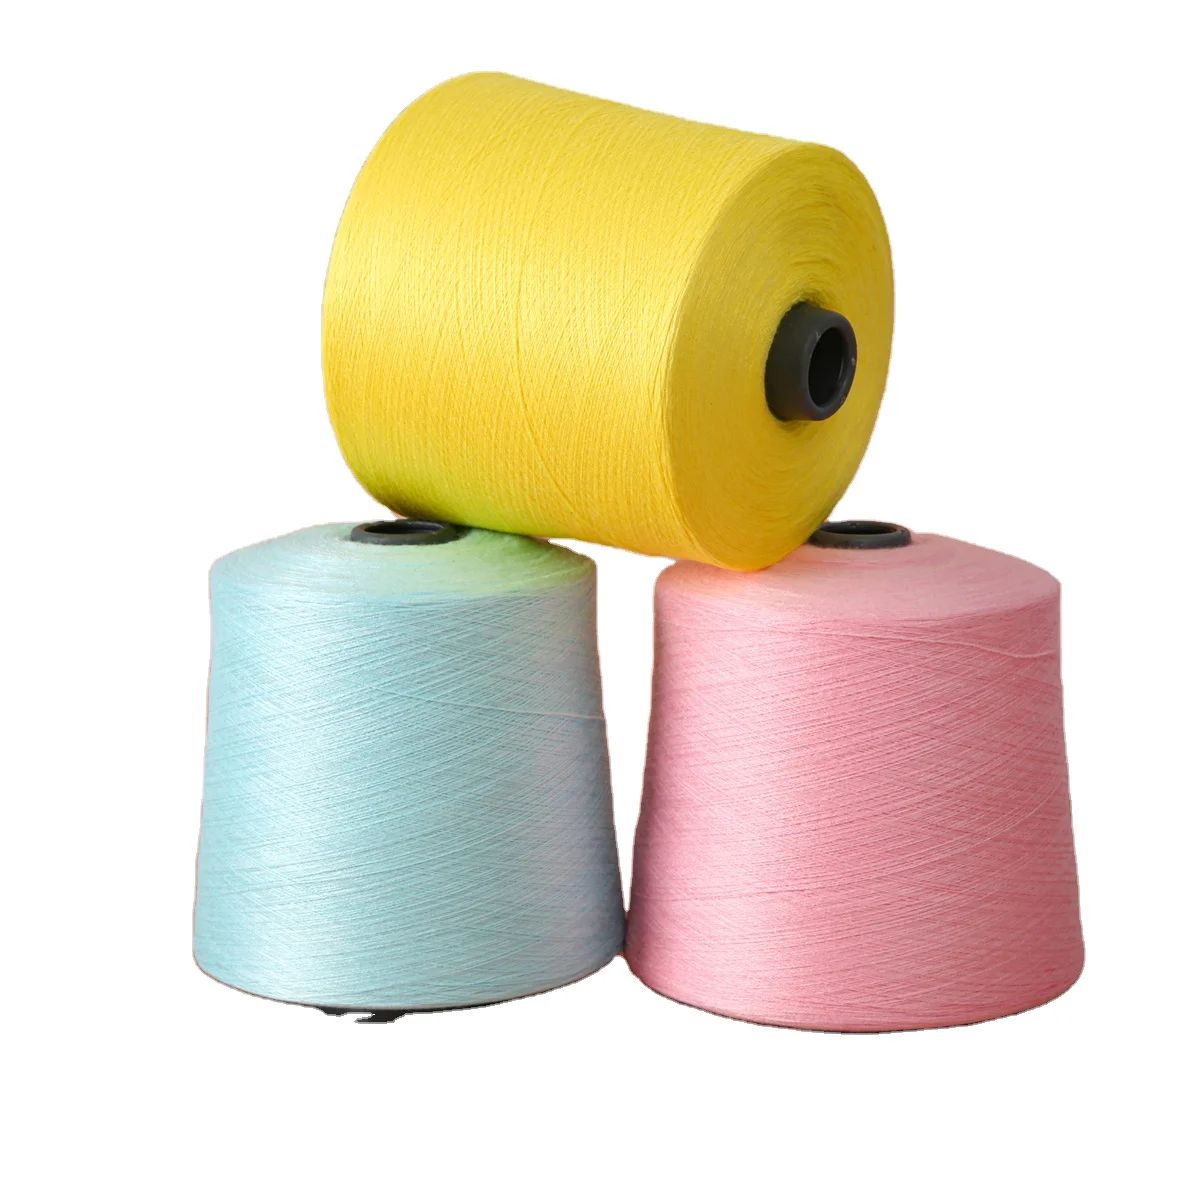 High Quality 28S/2 Viscose Nylon PBT Core Spun Yarn For Knitting  Professional Application In All